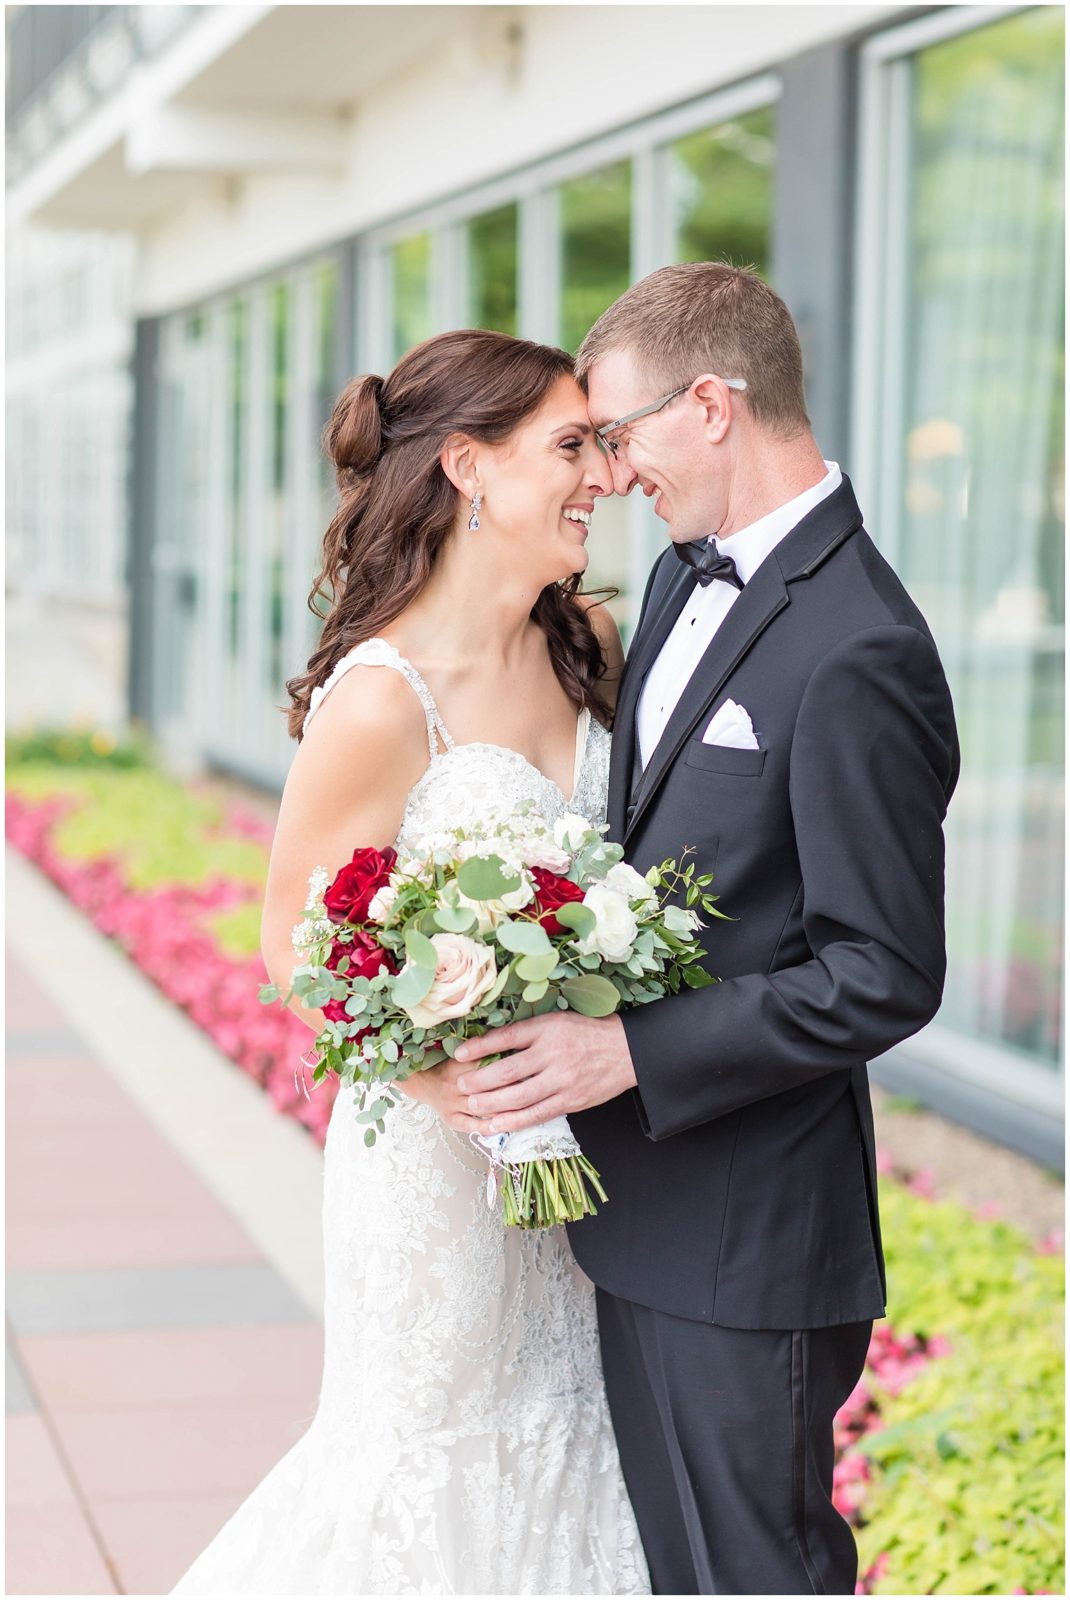 Bride and Groom First Look Portraits | Marriott Riverfront Wedding in South Sioux City, Nebraska shot by Jessica Brees Photo & Video